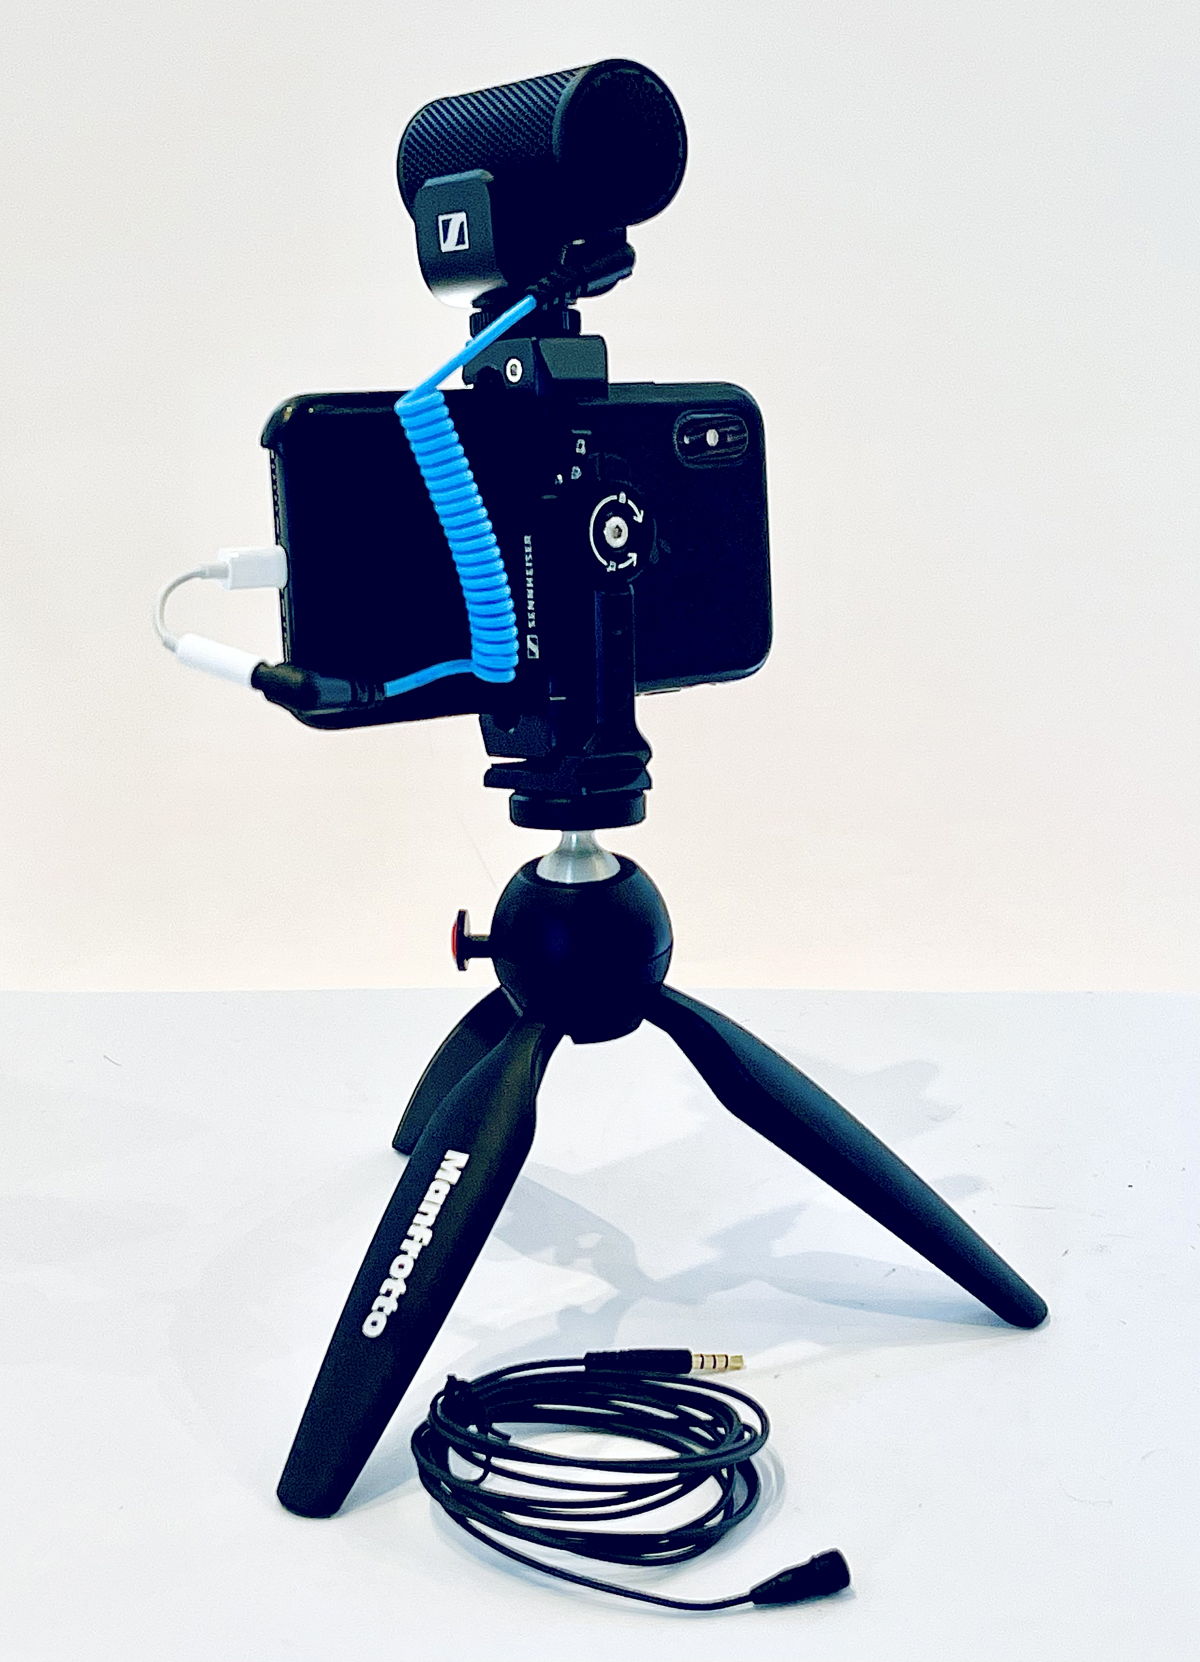 Figure 10.   Basic Kit  with iPhone XS, MKE 200 Mobile Kit (includes Manfrotto PIXI and Smartphone Clamp), XS Lav Mobile clip-on mic, and TRRS to Lightning adaptor  (Photo credit: Ivo Burum)